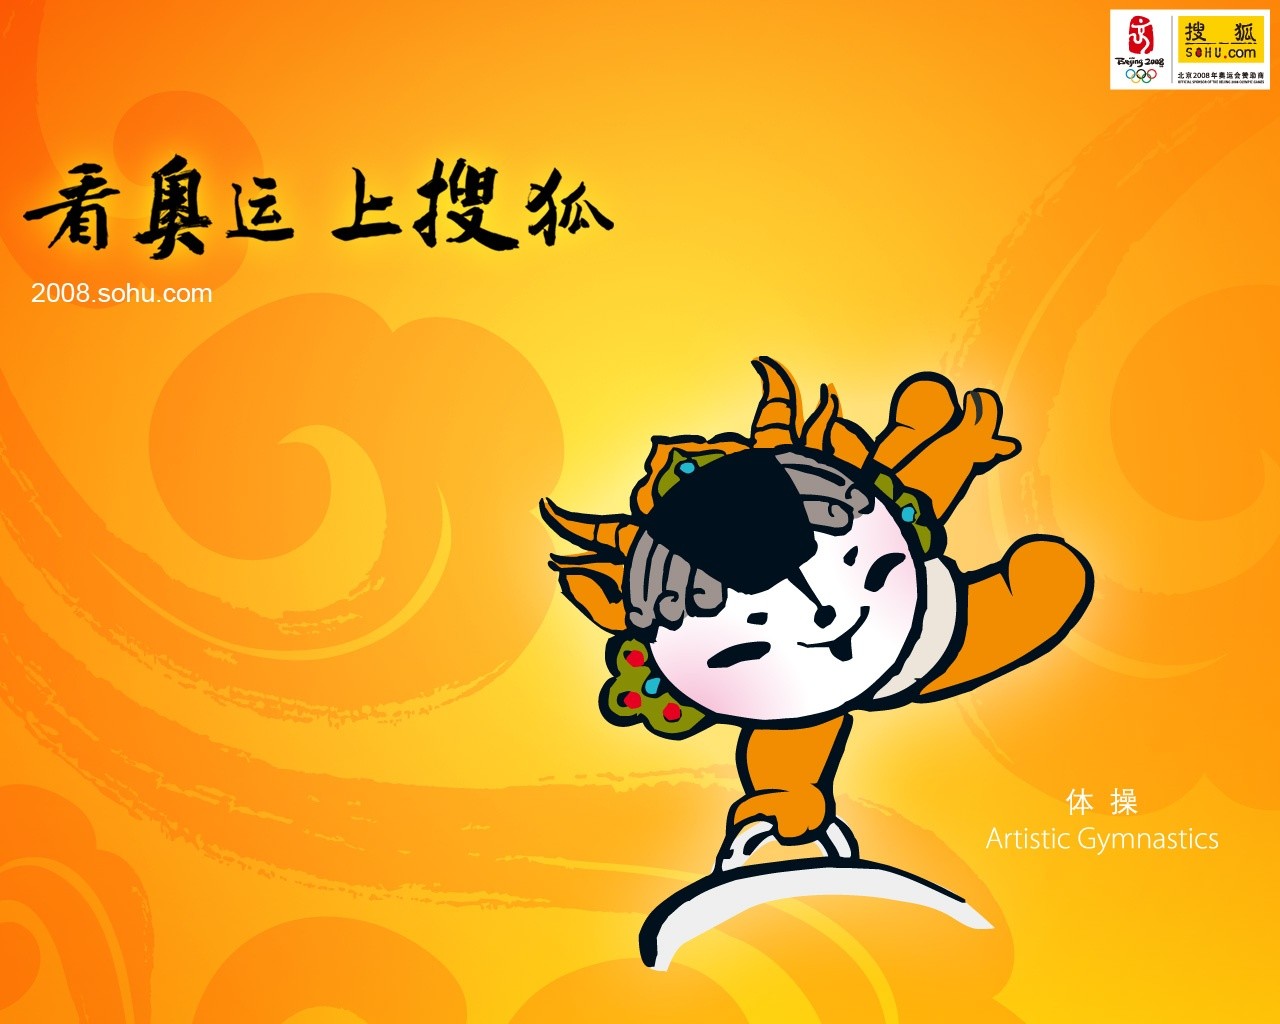 08 Olympic Games Fuwa Wallpapers #28 - 1280x1024